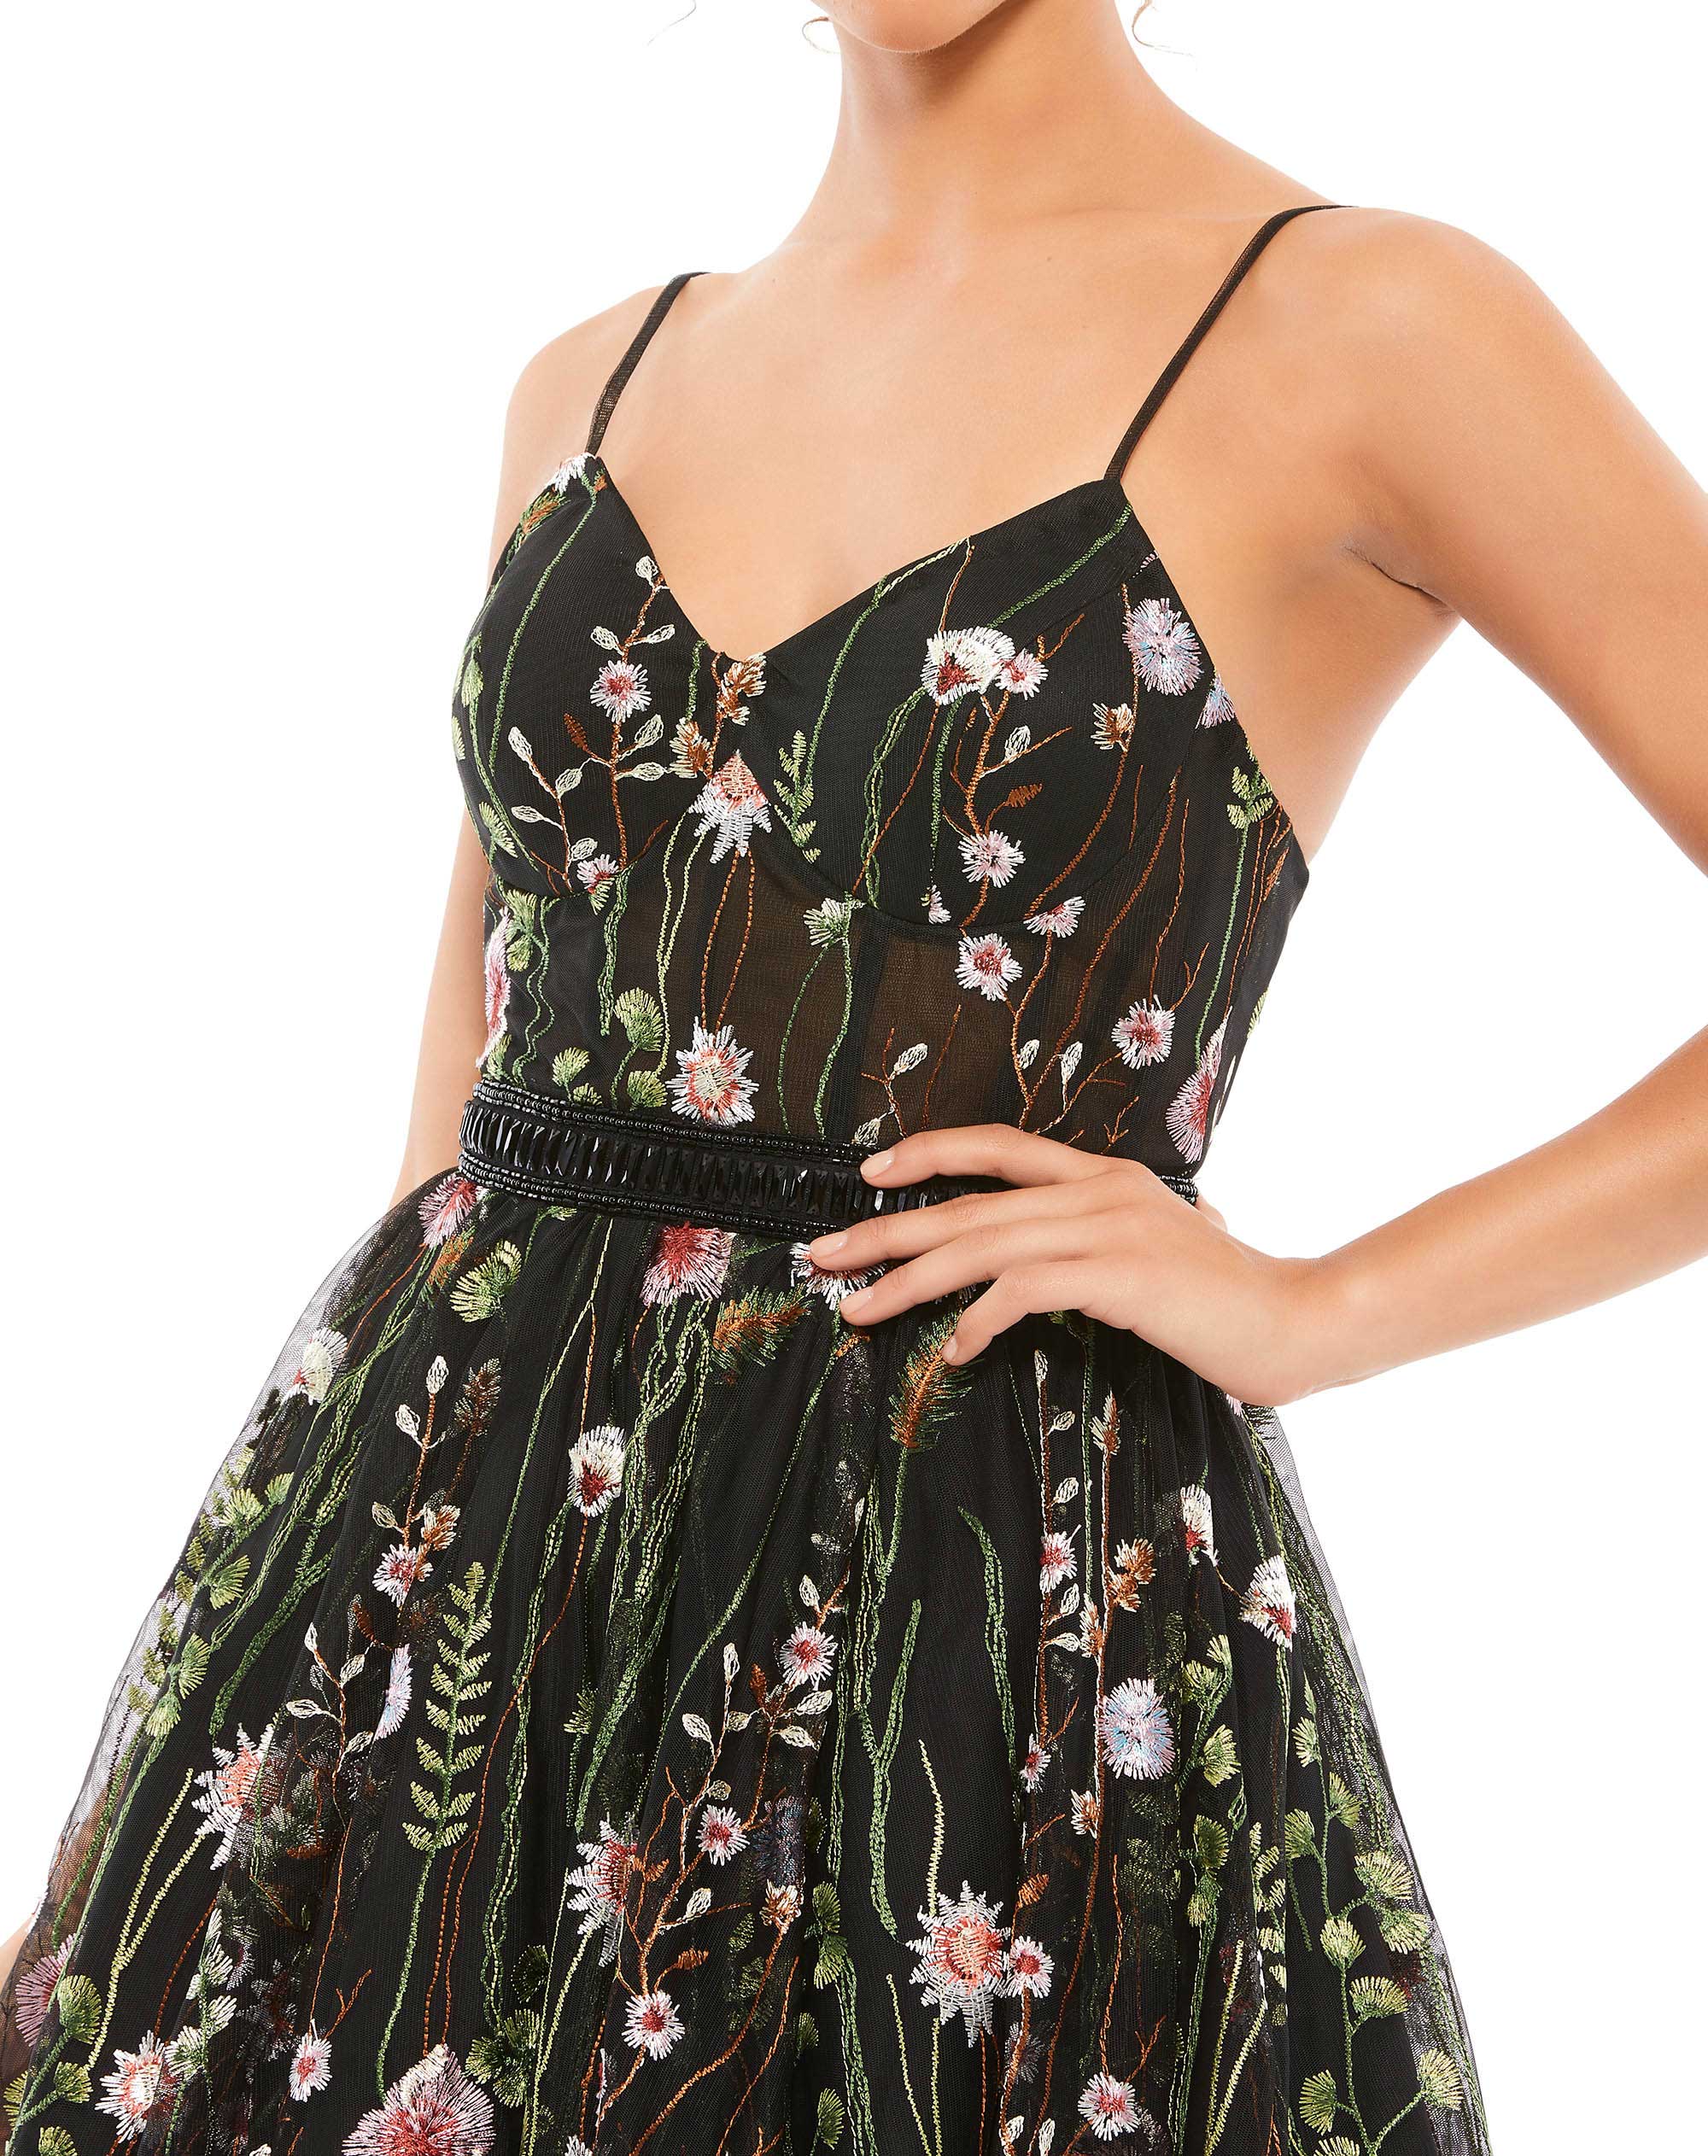 FLORAL EMBROIDERED BUSTIER A-LINE DRESS